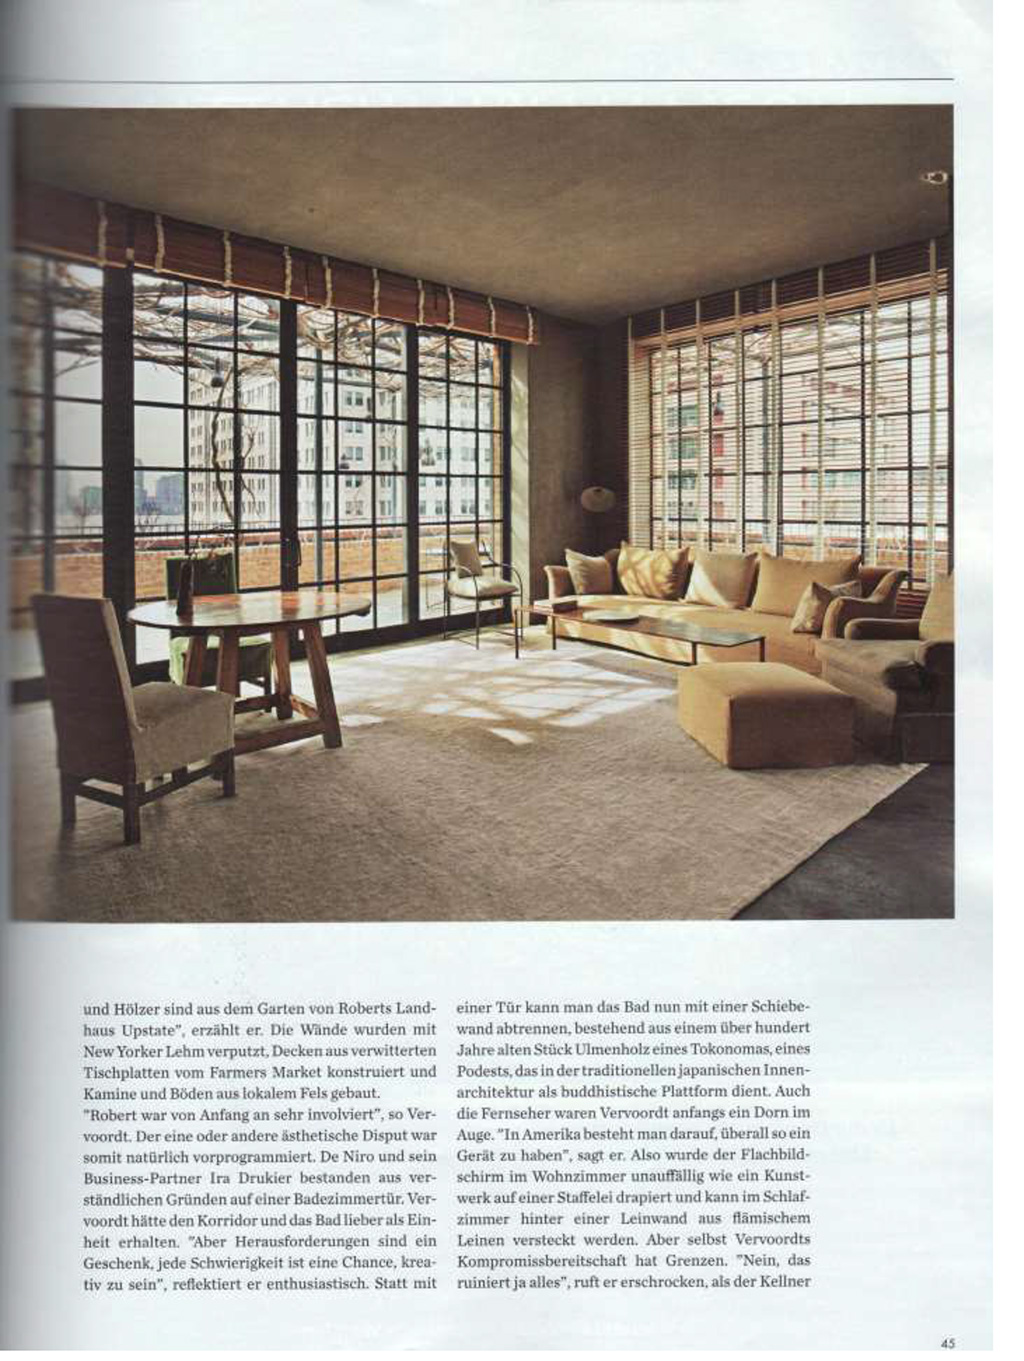 Elle Decor article featuring the Tribeca Penthouse and Axel Vervoordt